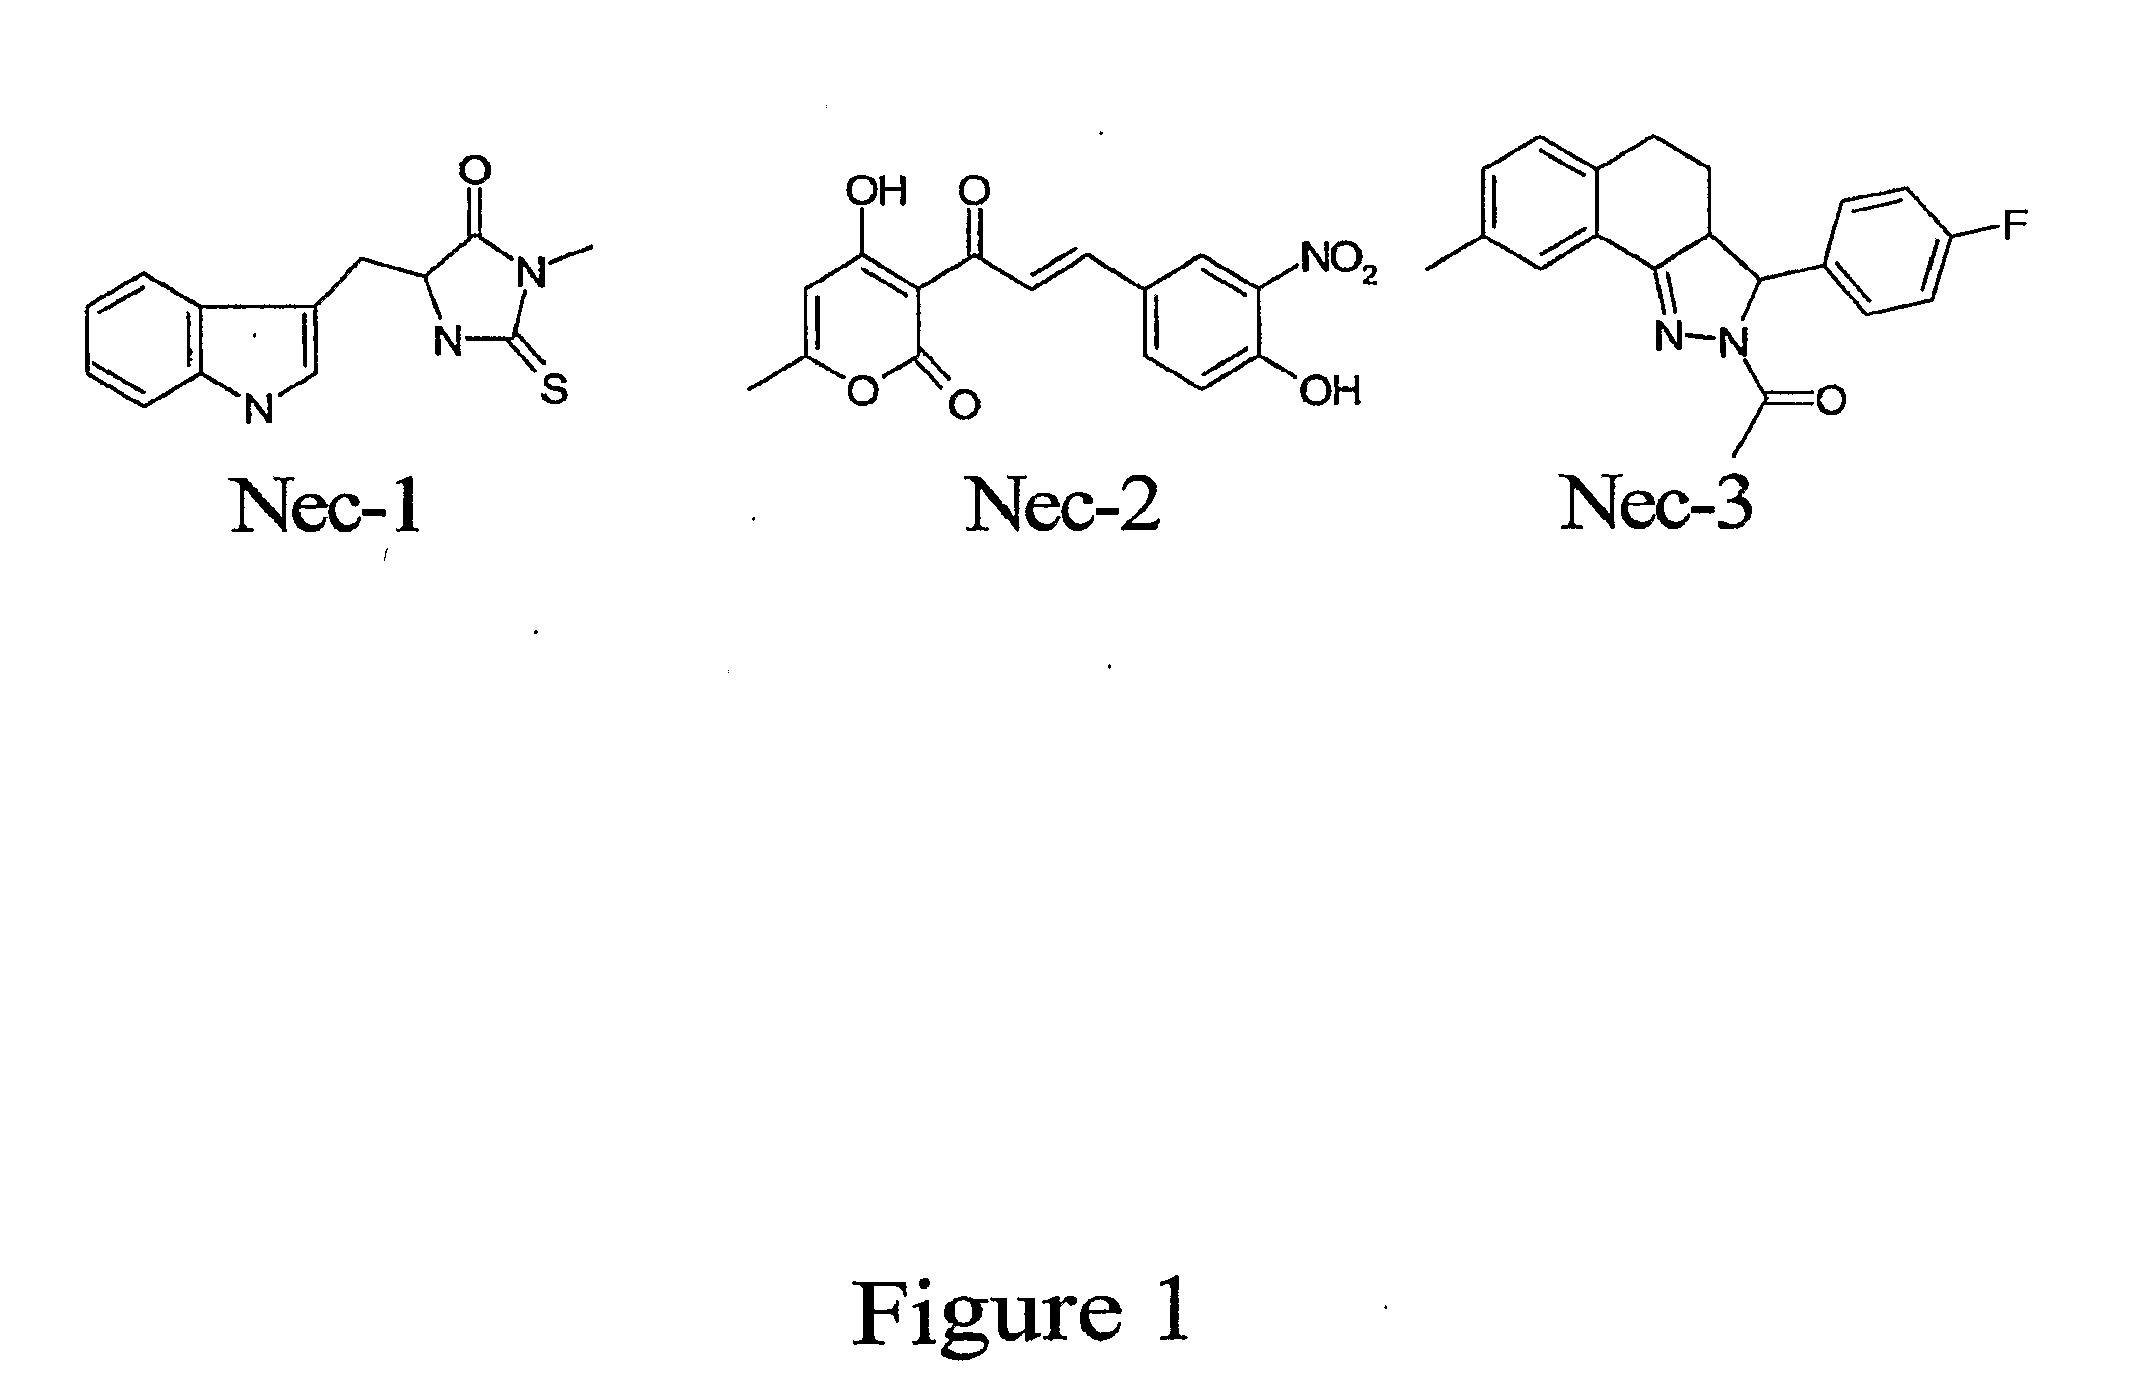 Compounds, Screens, and Methods of Treatment